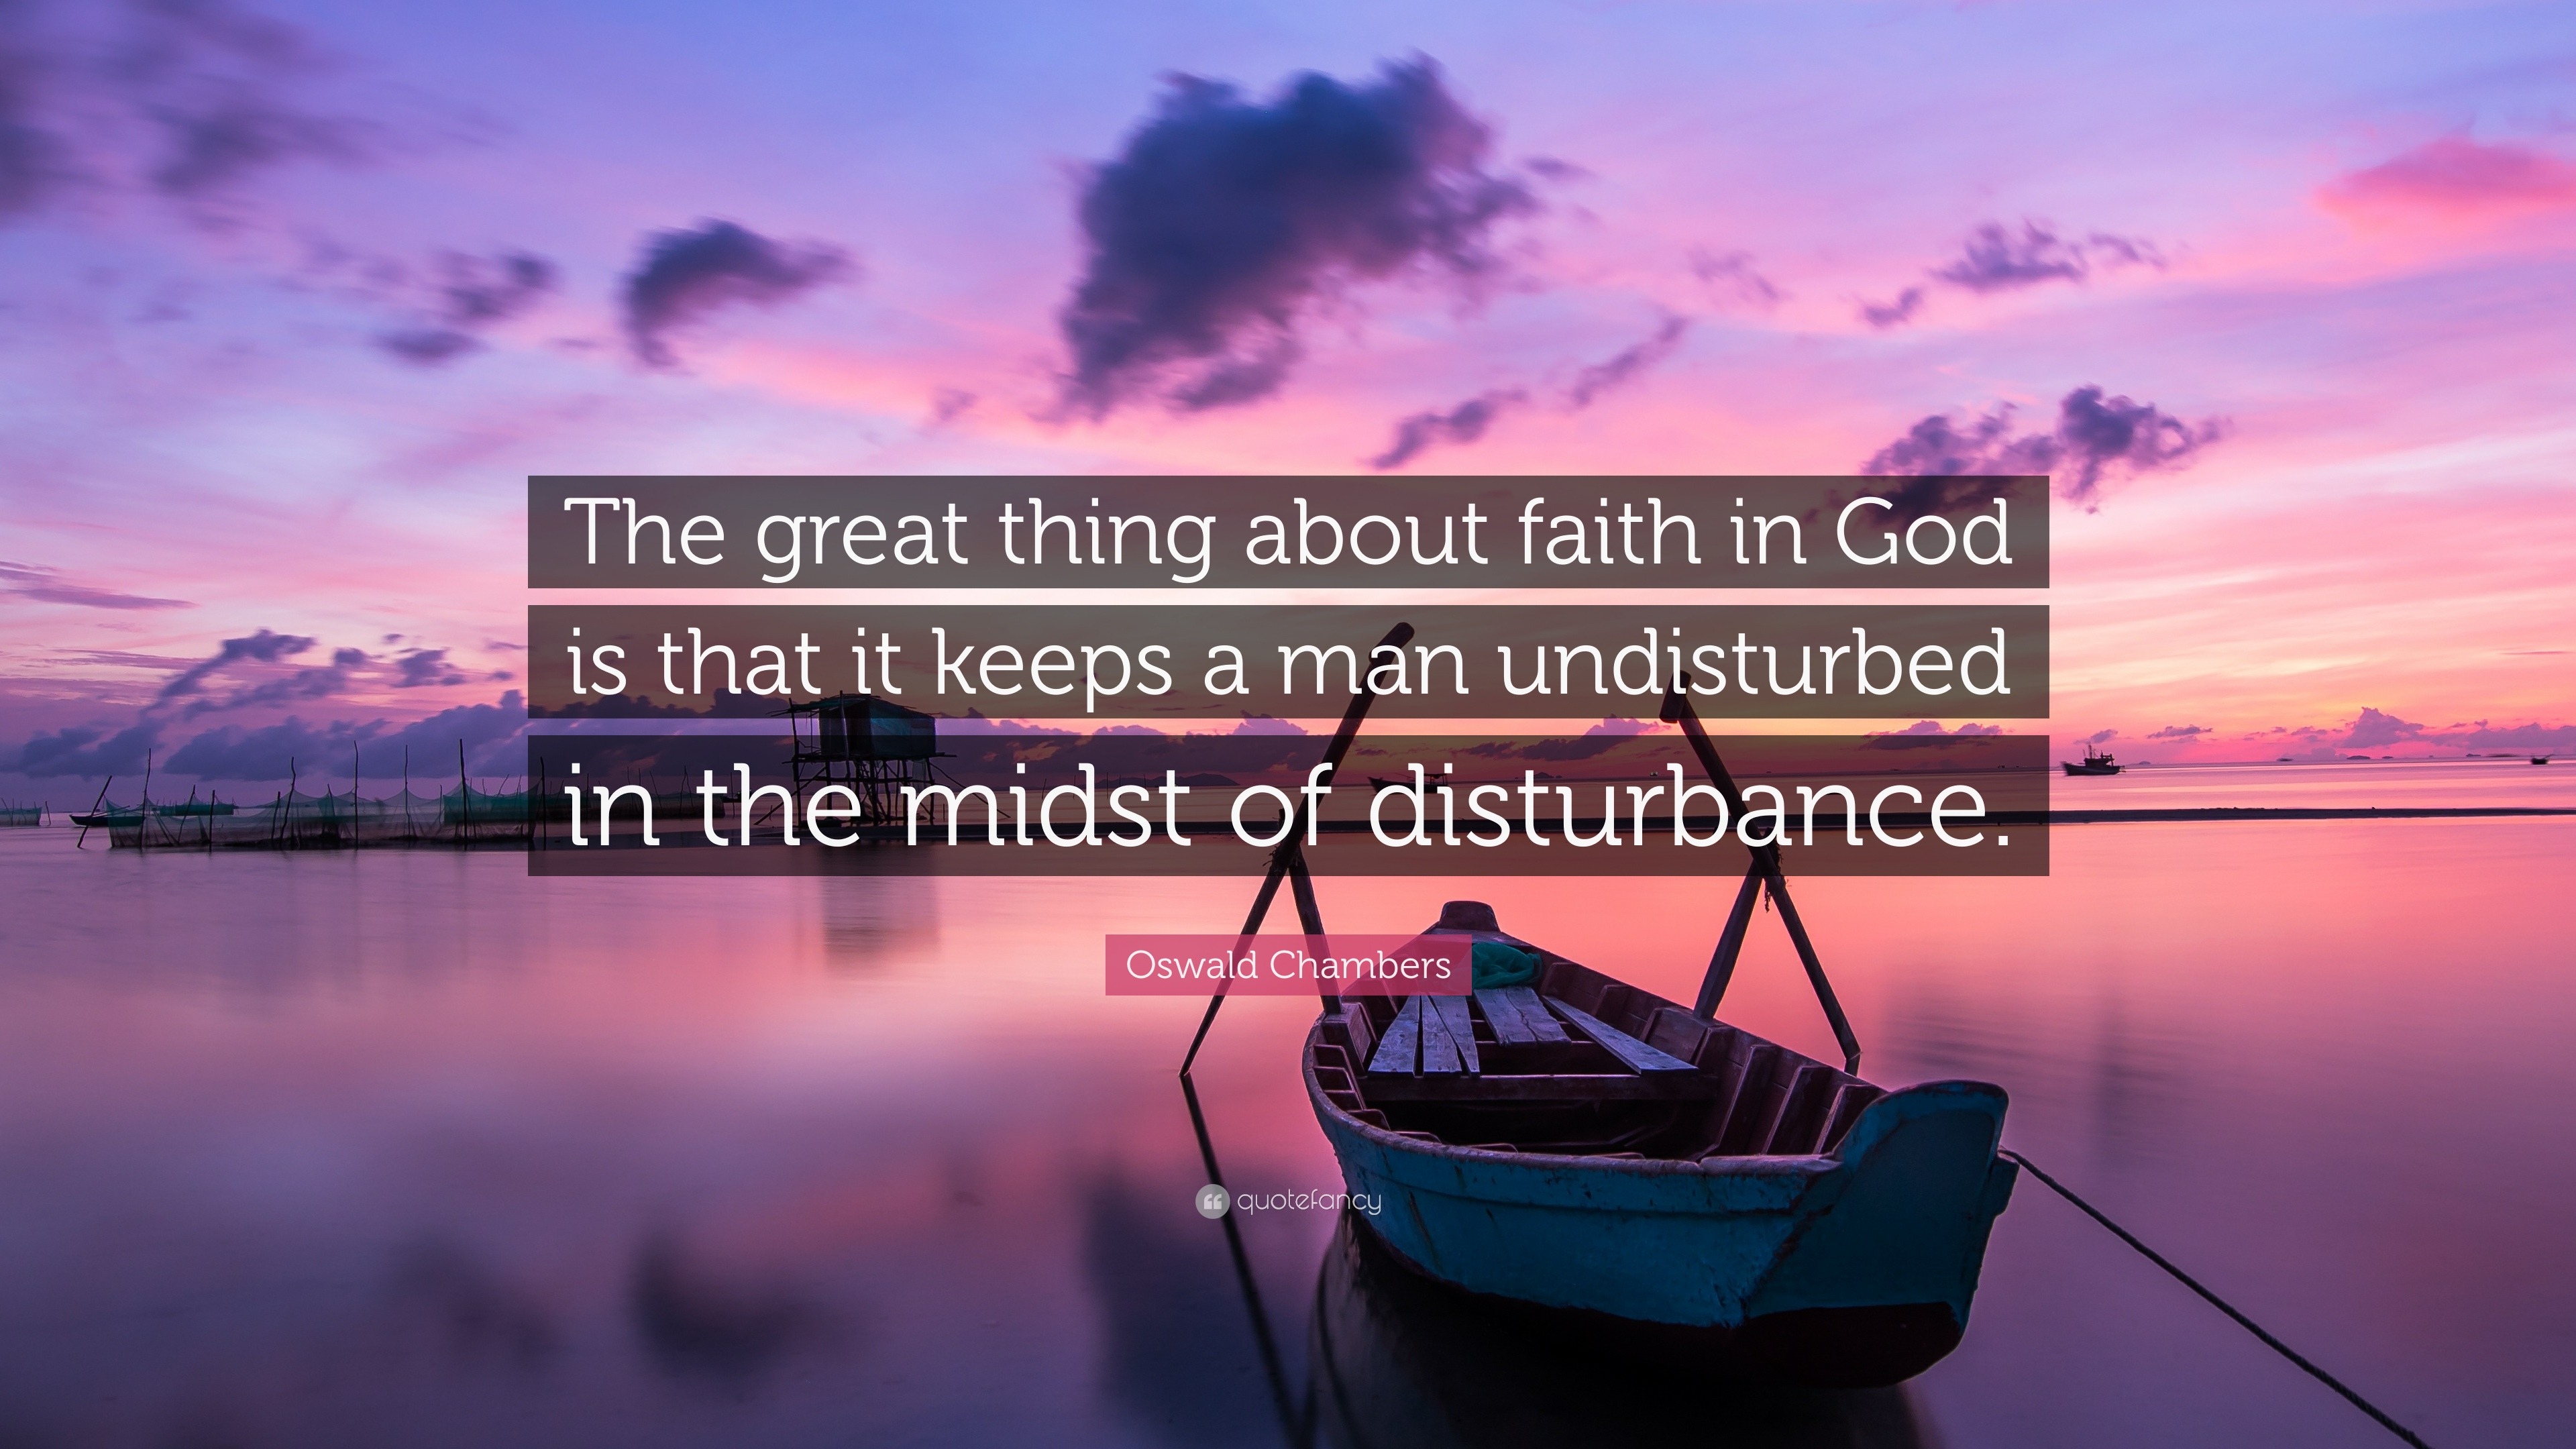 Oswald Chambers Quote: “The great thing about faith in God is that it keeps  a man